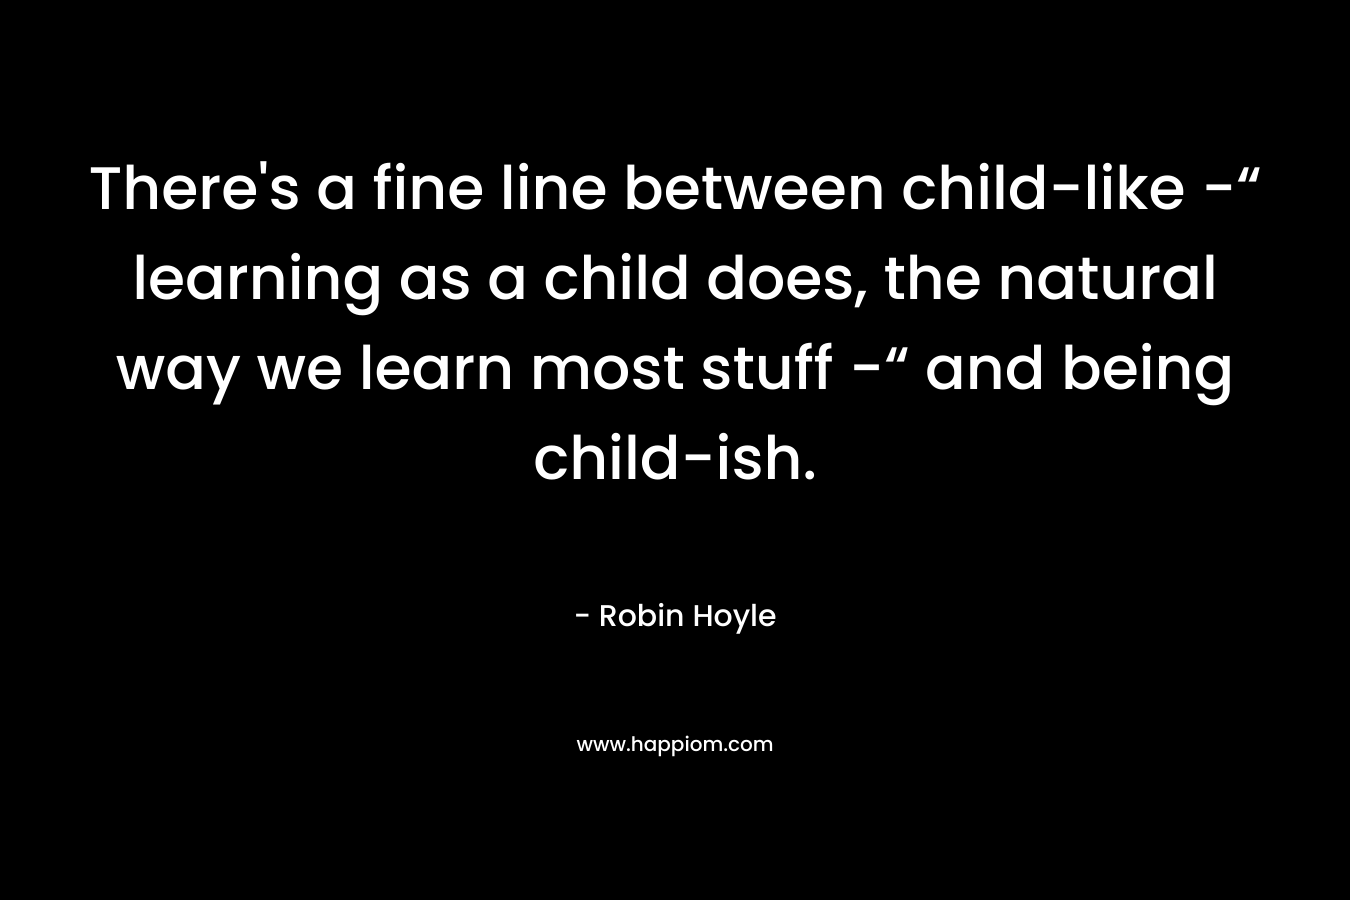 There’s a fine line between child-like -“ learning as a child does, the natural way we learn most stuff -“ and being child-ish. – Robin Hoyle